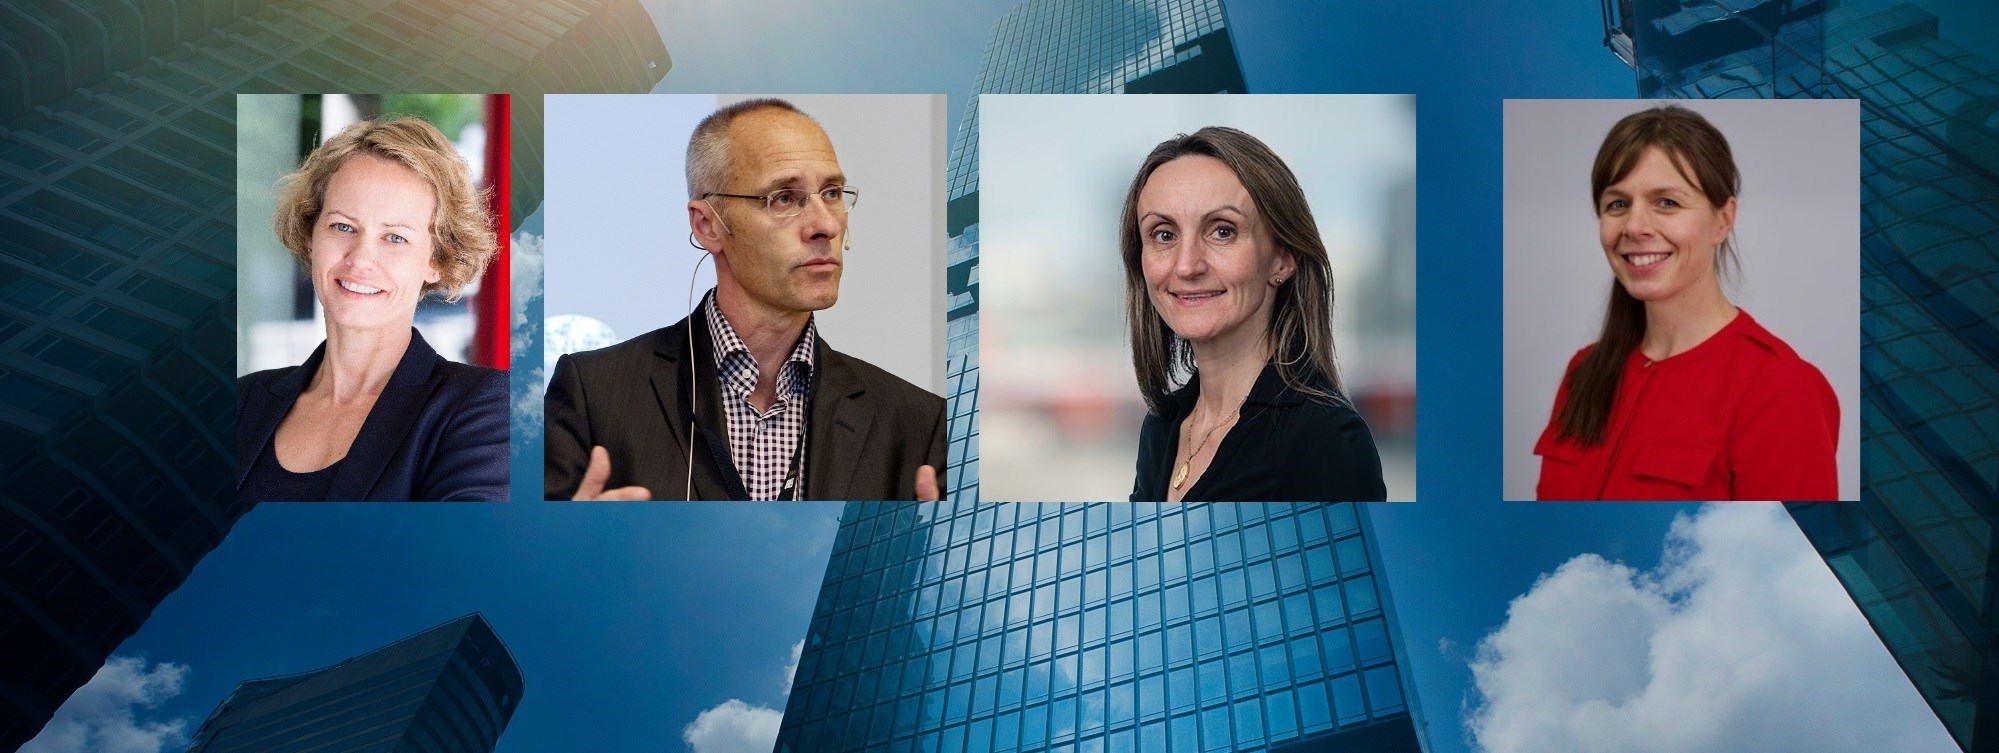 Meet the experts 24 March: The NHH professors Tina Søreide and Guttorm Schjelderup, Group Executive Vice President Compliance at DNB Mirella Elisa Grant and Sigrid Klæboe Jacobsen, Executive director and co-founder of Tax Justice Network – Norway. 